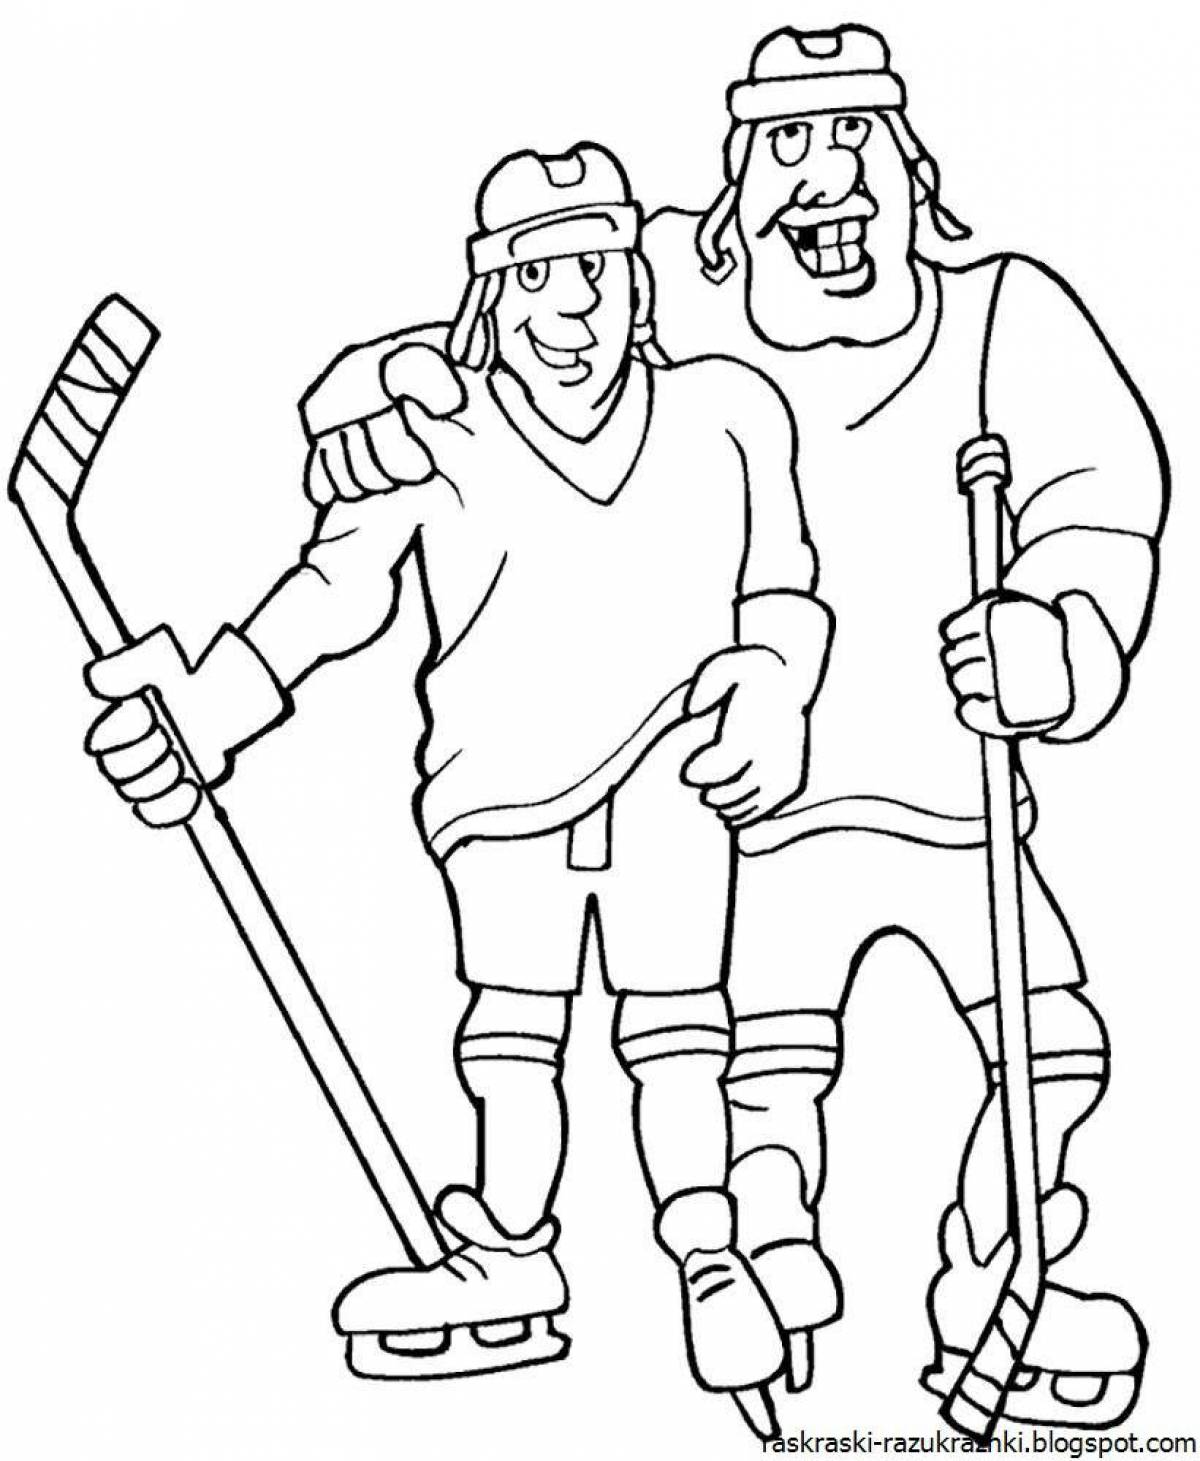 Animated hockey player coloring page for kids